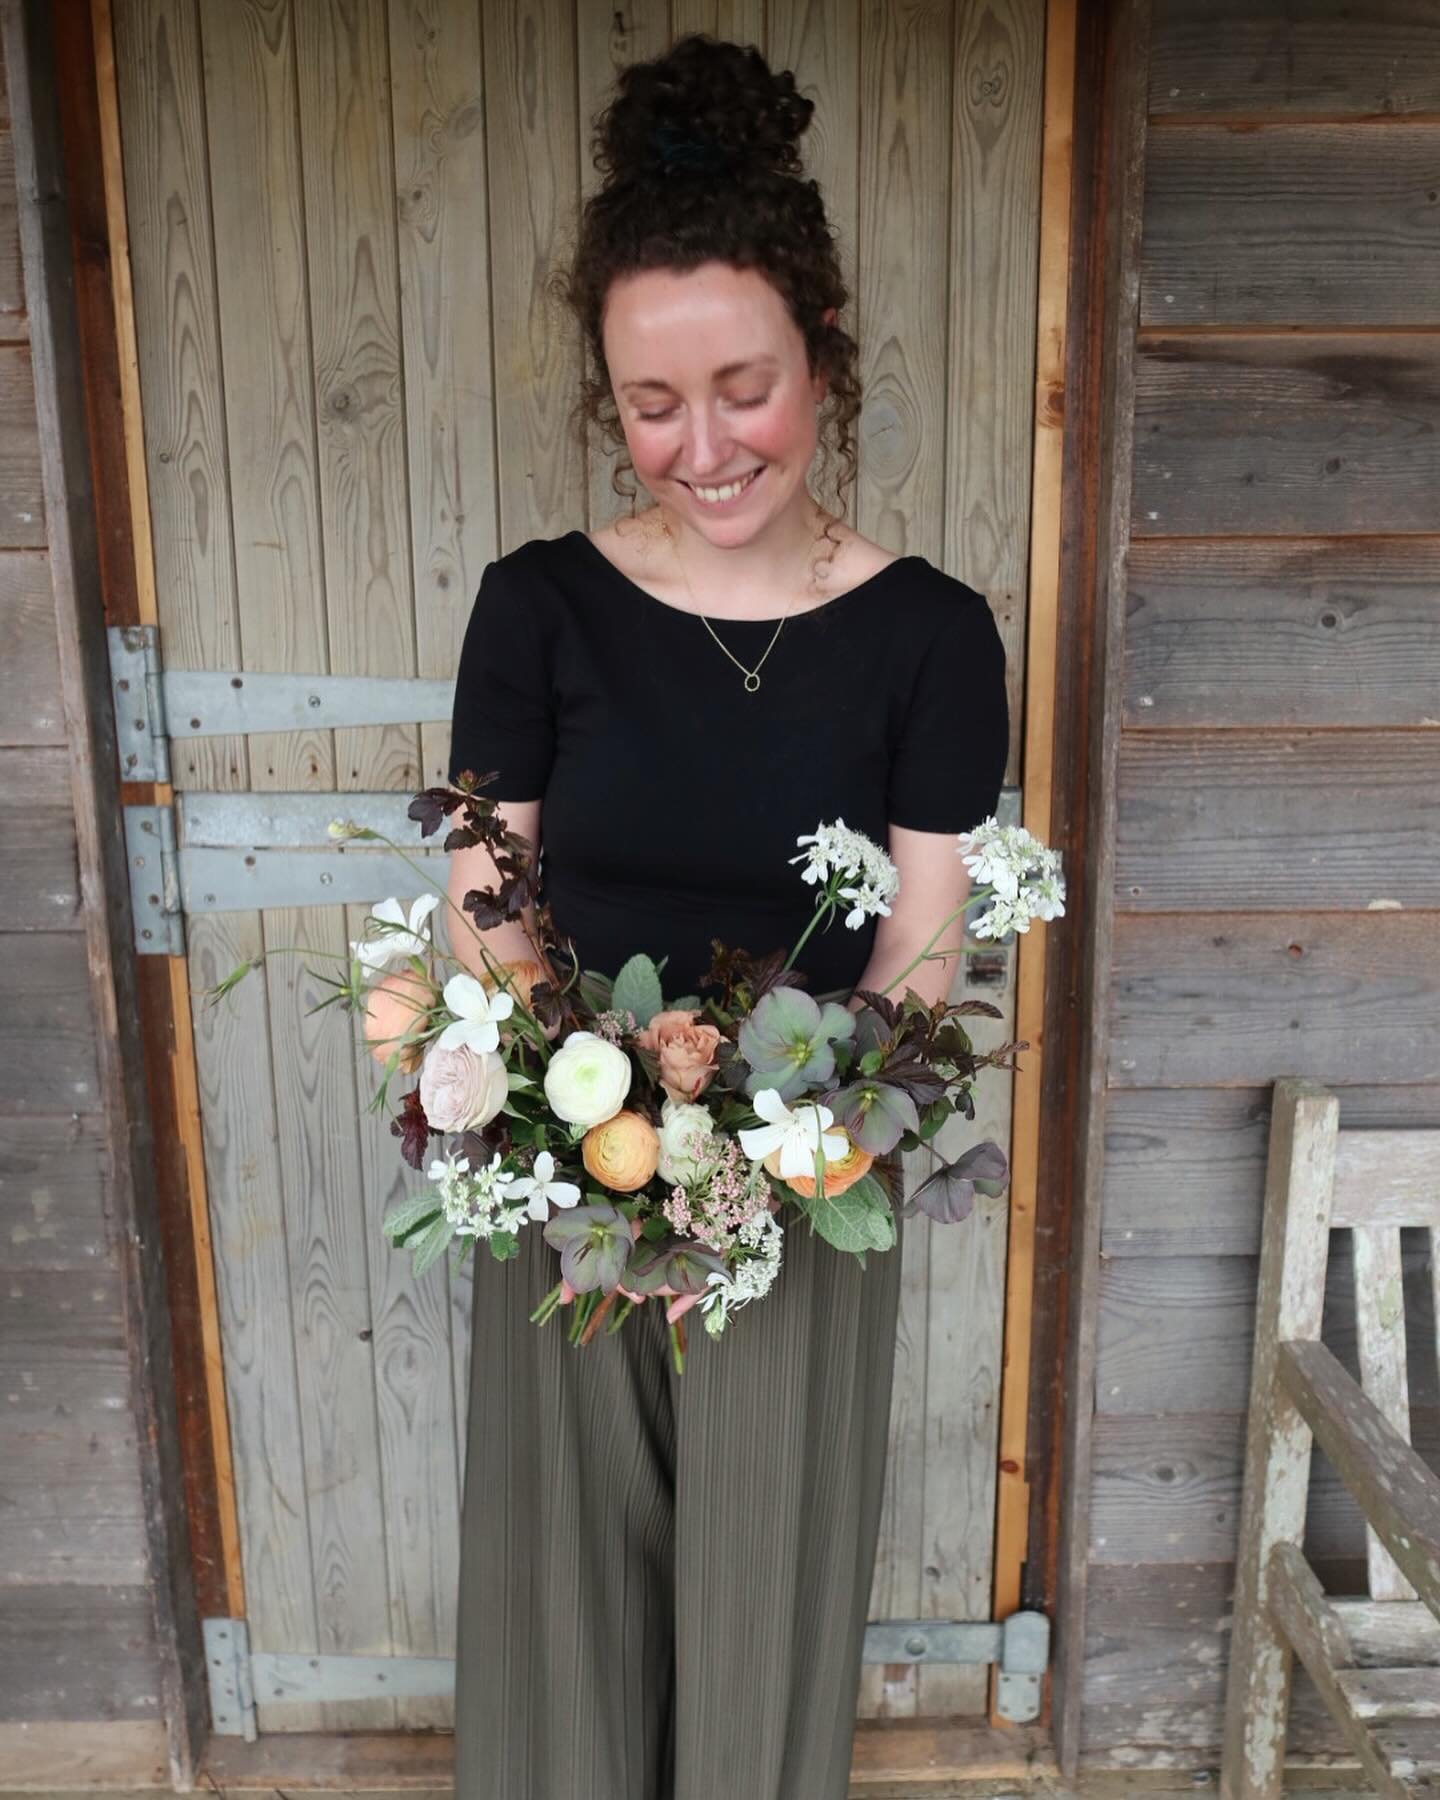 Full circle special moment in my floral career last week returning to flower school, but this time on the other side of the workbench, for a bridal bouquet demo and chat about all things wedding flowers with the students 🌿

Creating a muted moody sp